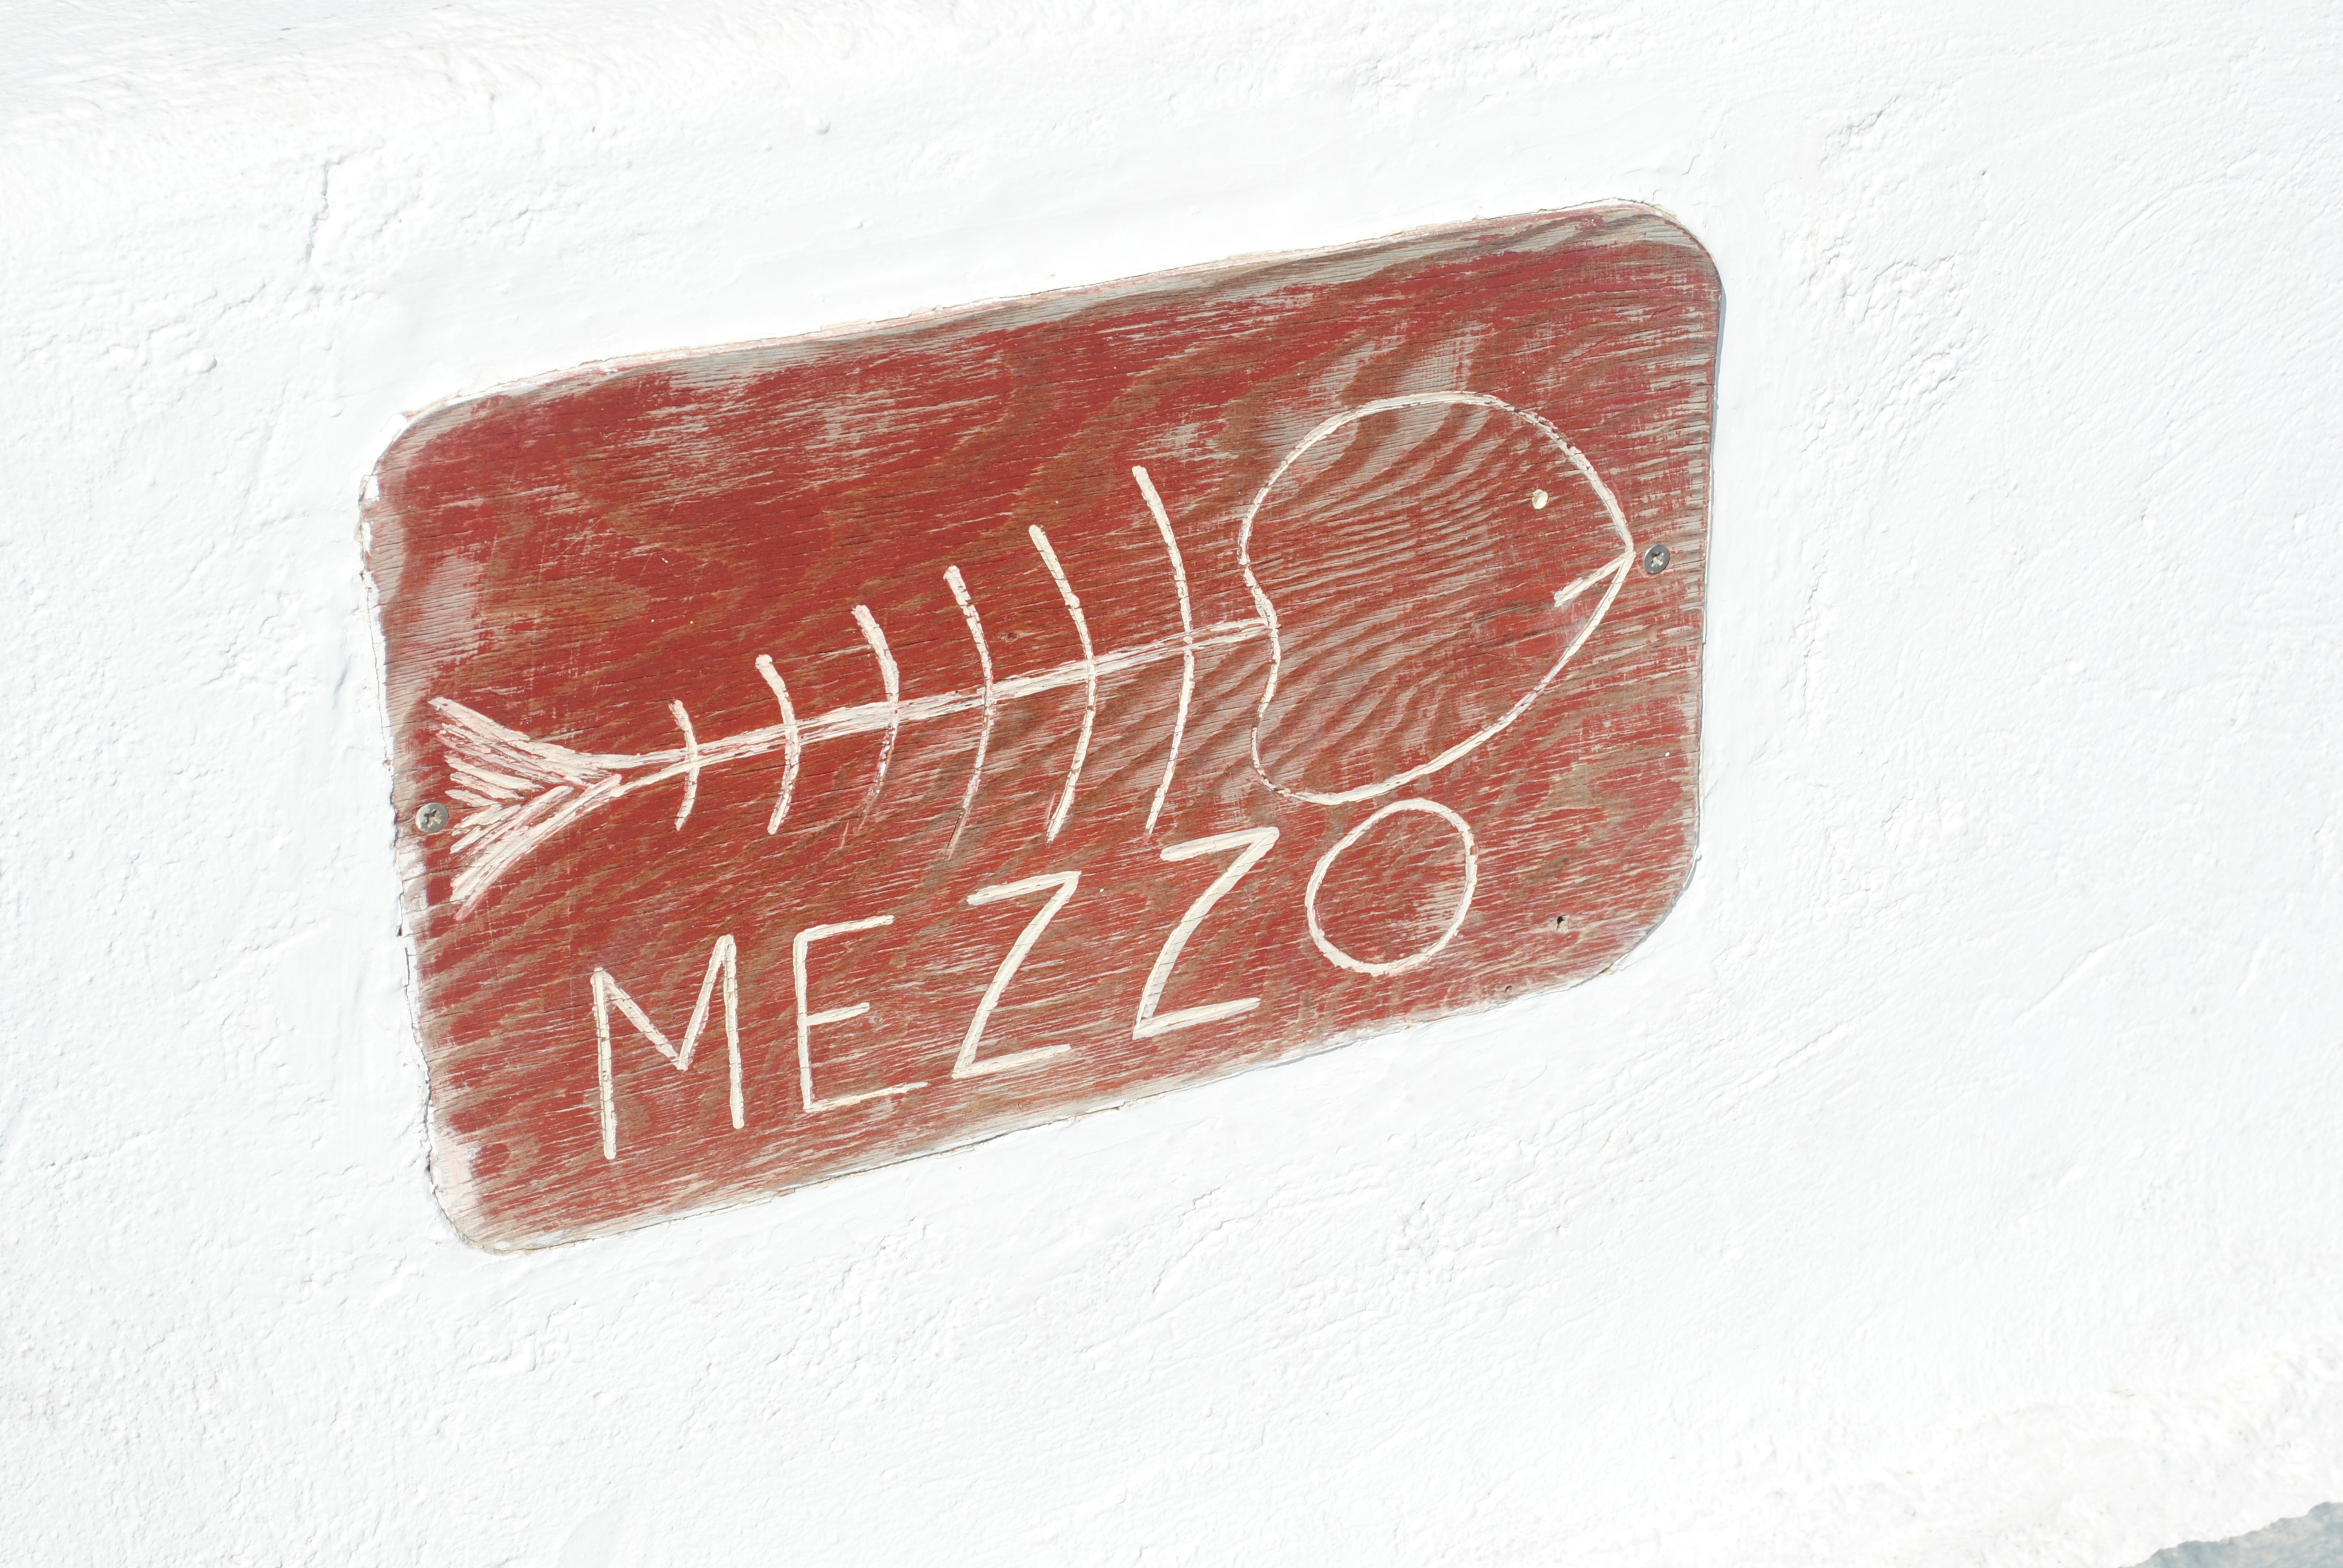 Mezzo is the best restaurant we ate at in Greece!